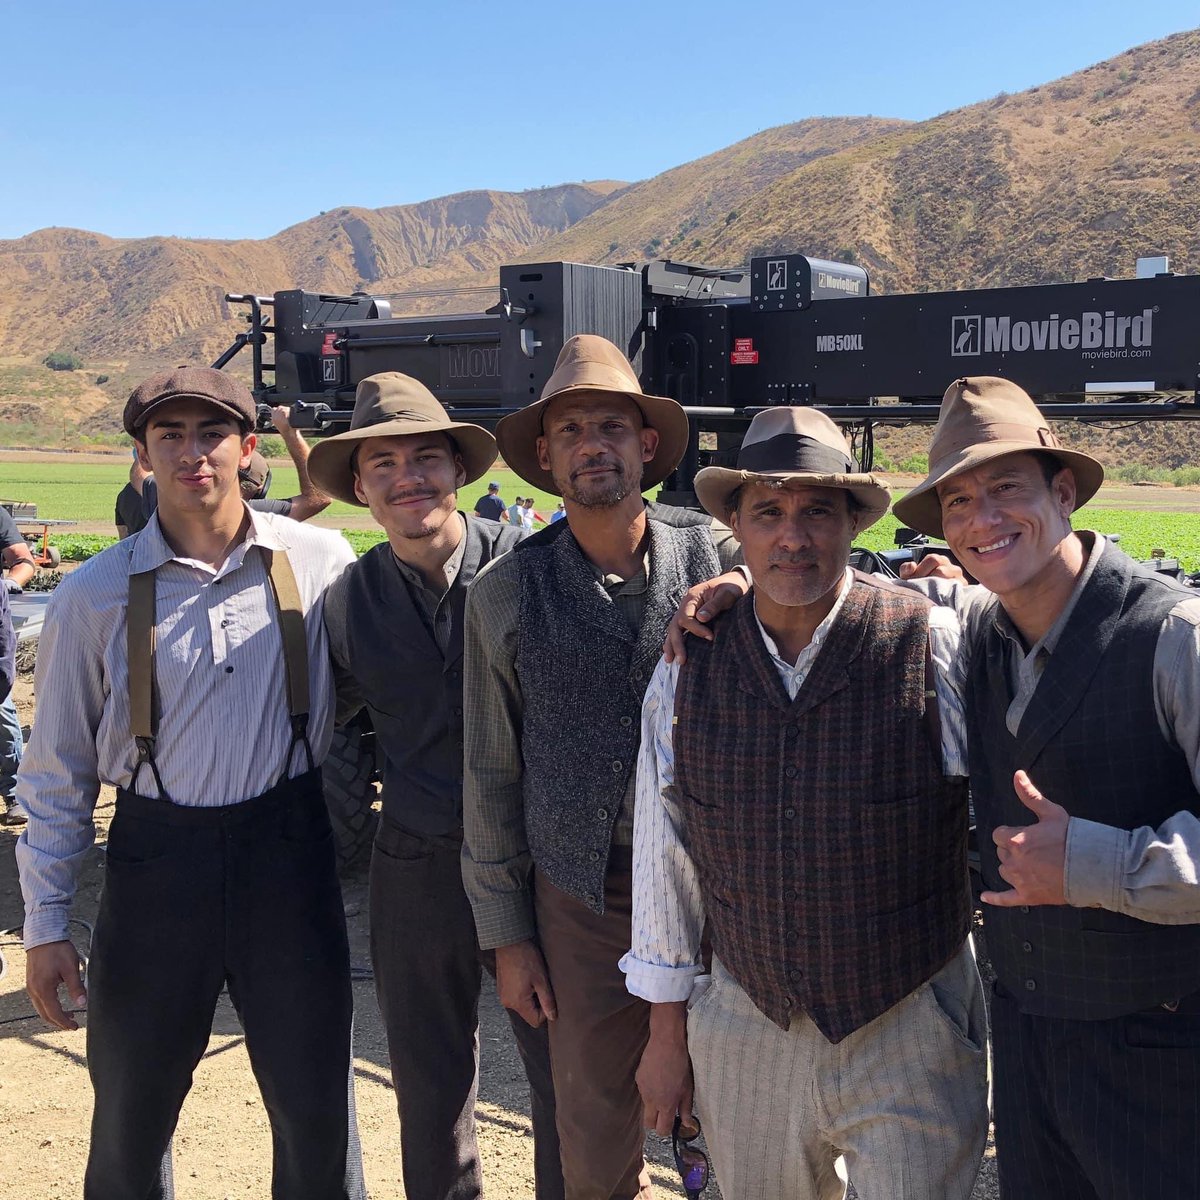 Big congrats to stunt man Hector Melgoza (far left) on his spot in Showtime’s Penny Dreadful. Hector is featured in a knockdown drag-out martial arts brawl in episode one of Demonhuntr as one of the first demons you see in the series. Go check him out!

#stunts #stuntperformer